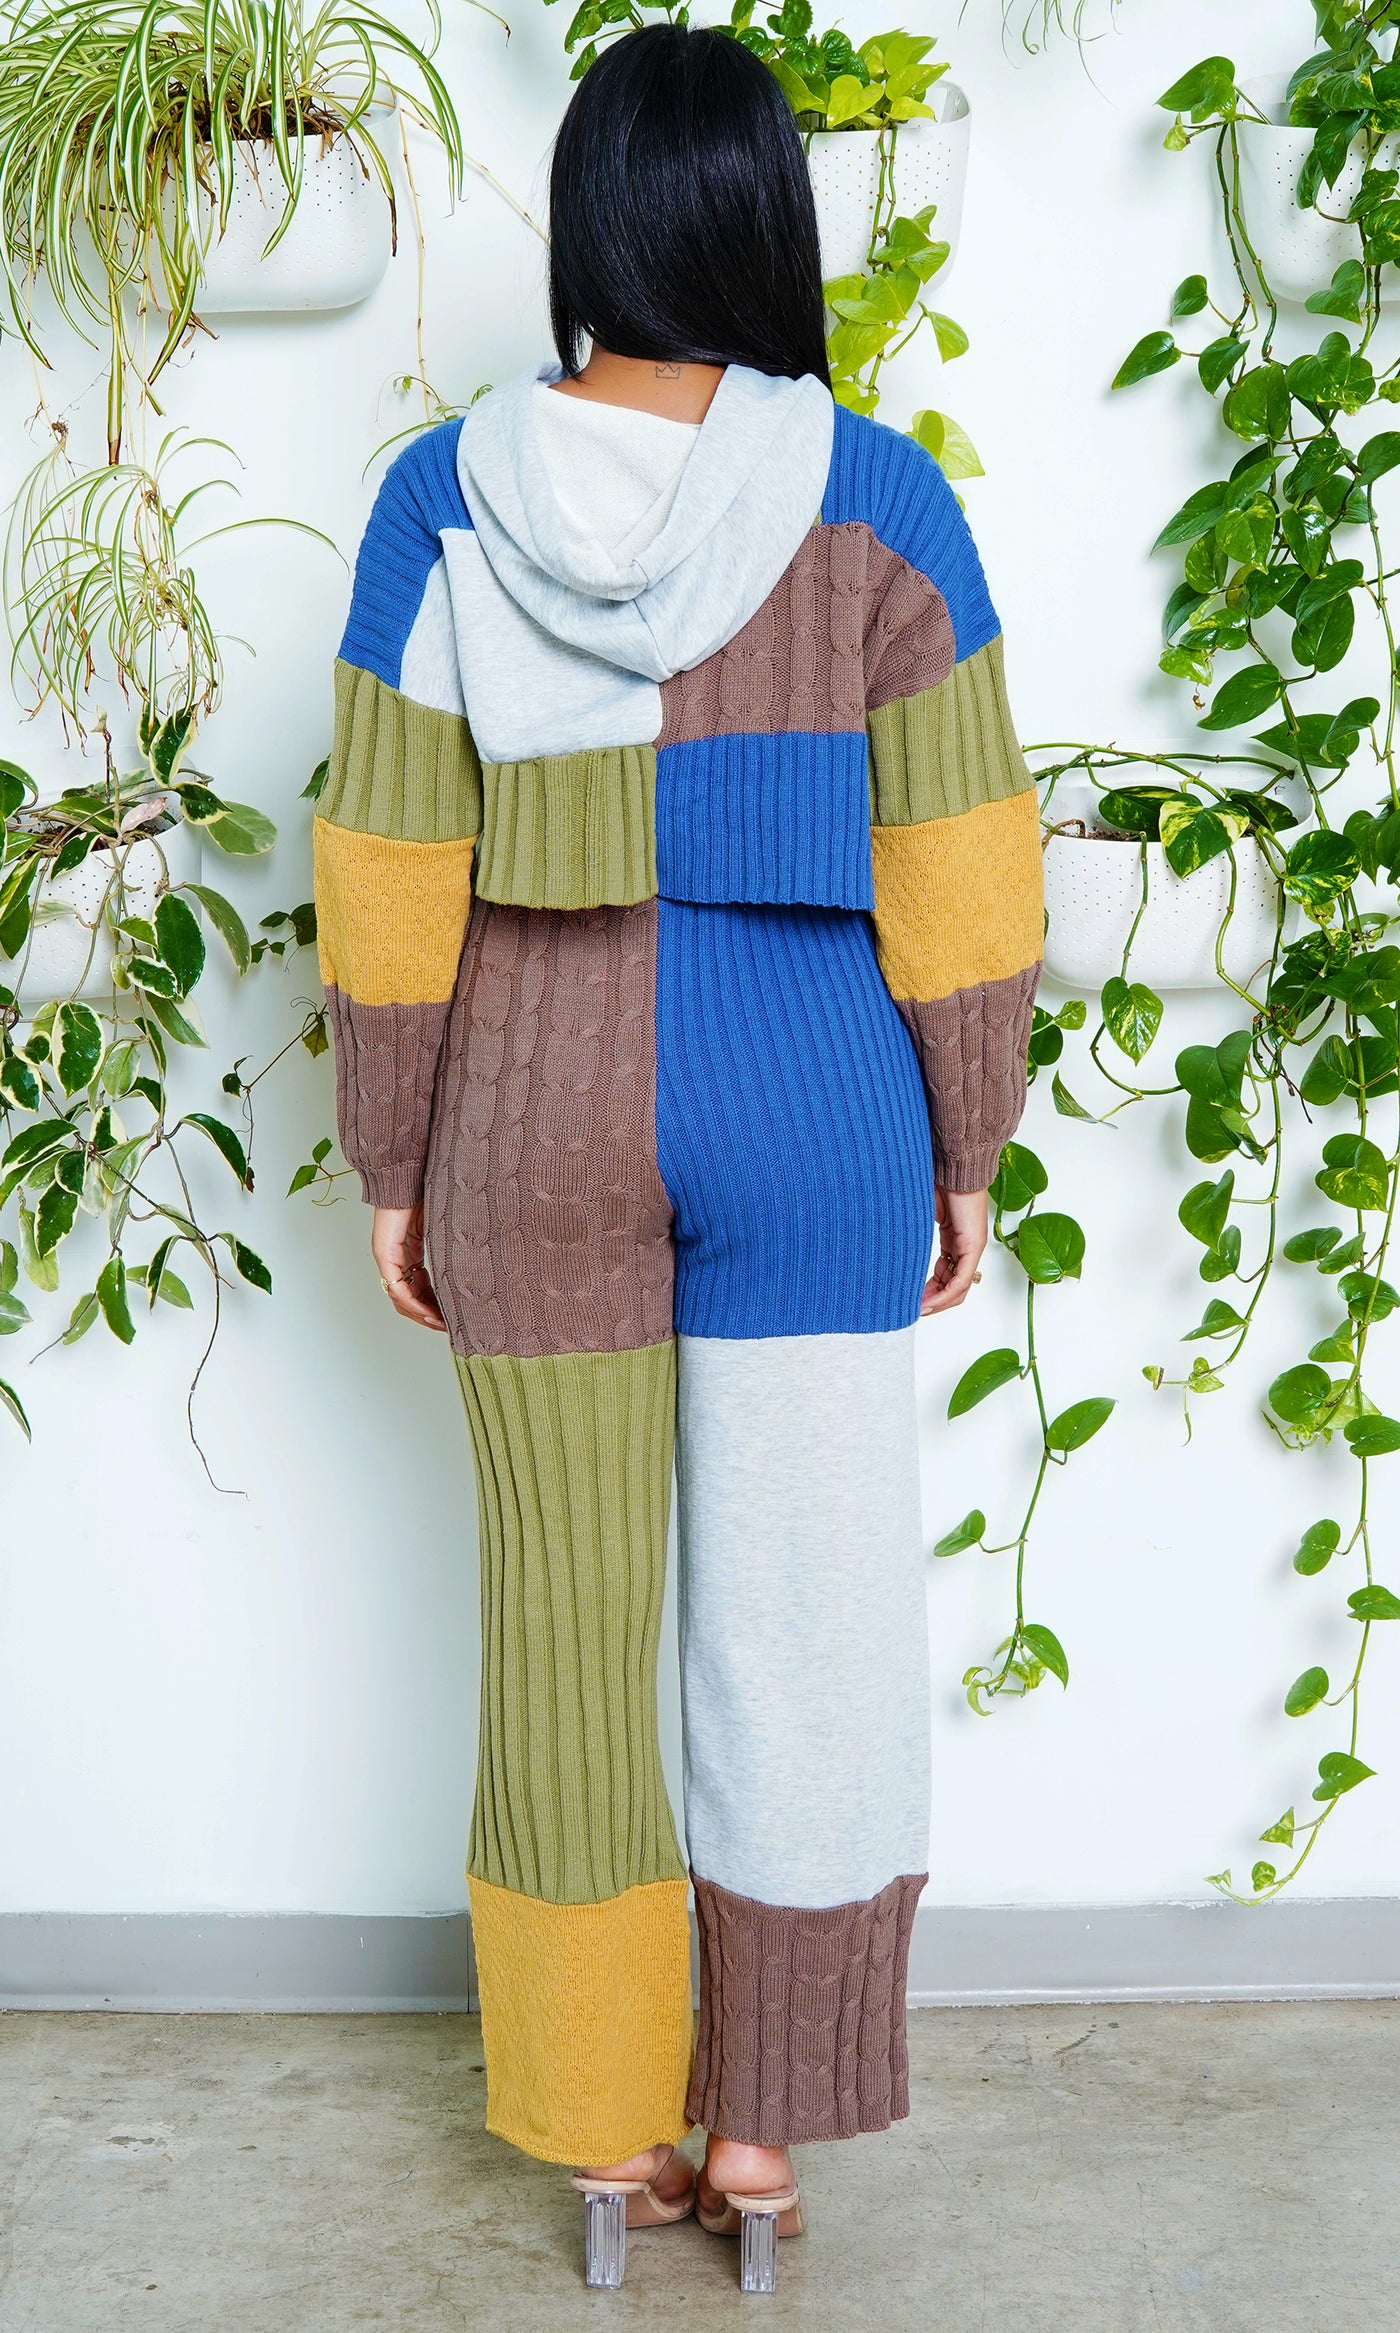 The "Fuzzy Feeling" Knitted Sweater(Color Block) - Cutely Covered